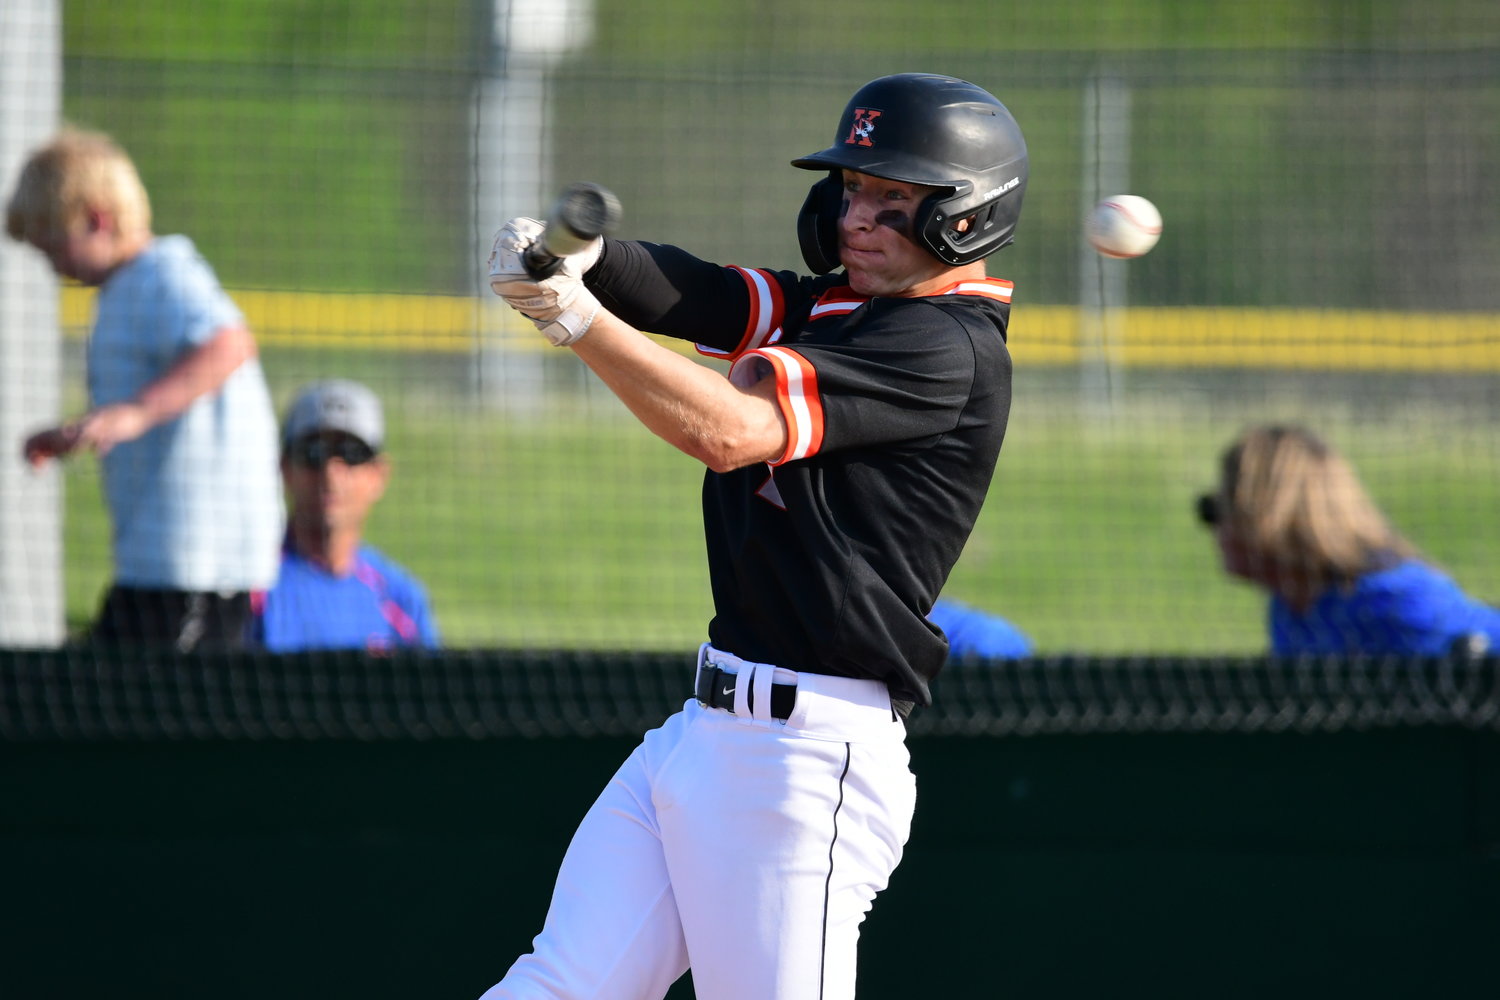 Photos from a baseball game between Kirksville and Putnam County on May 11, 2022.